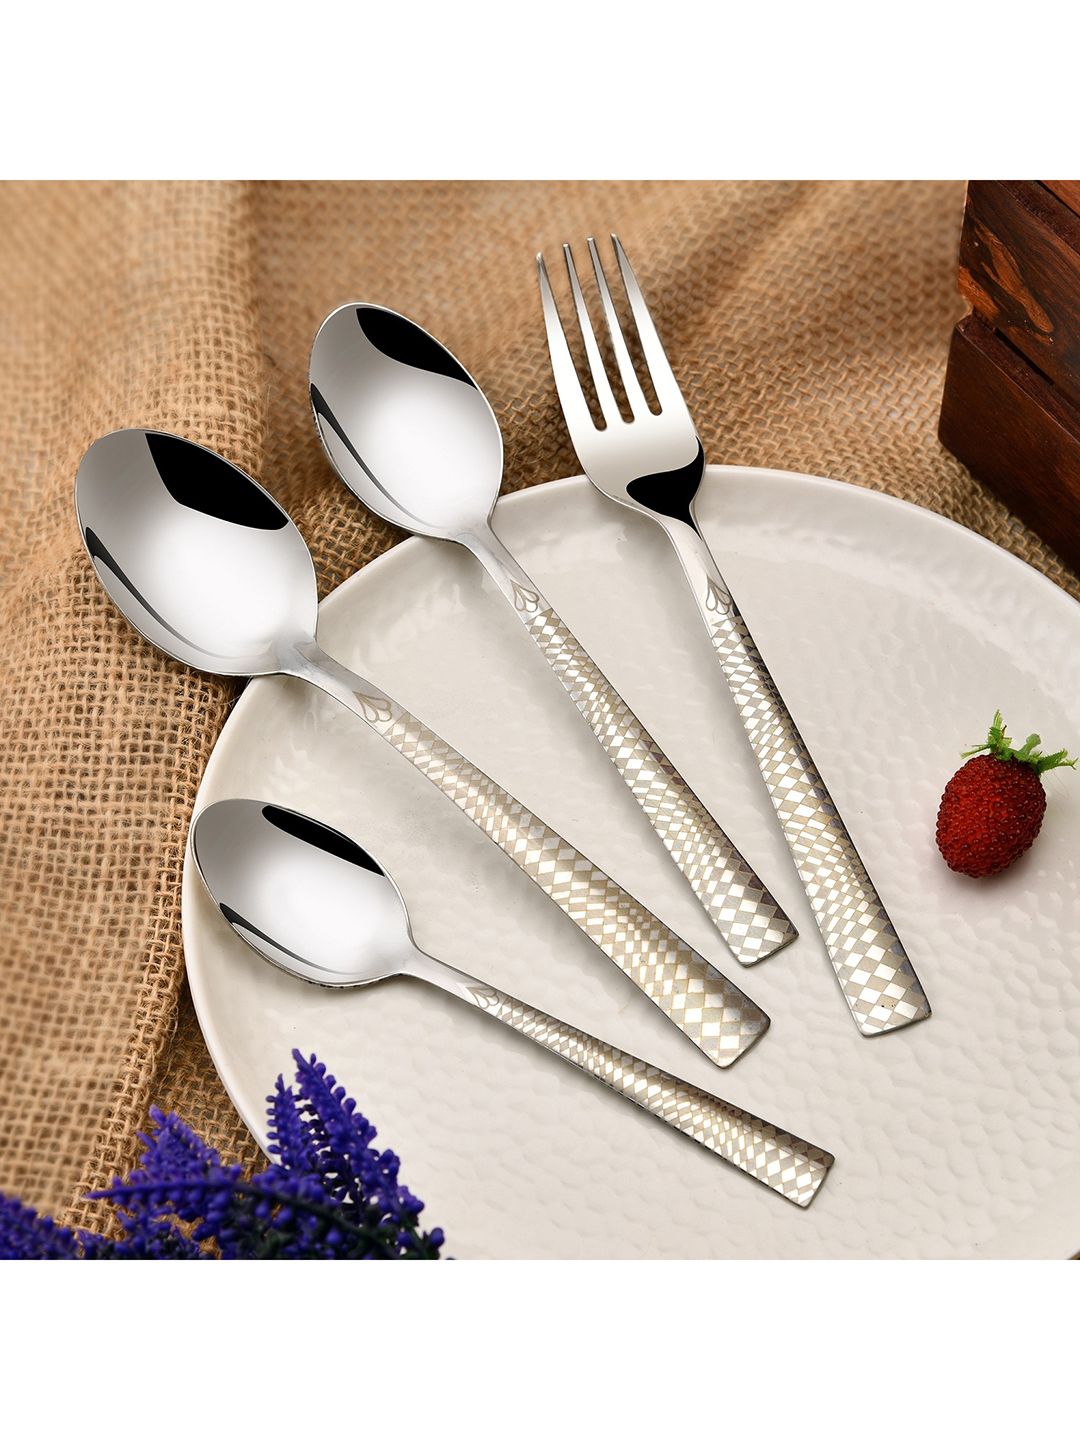 FNS Set of 24 Silver-Toned Mixed Cutlery Set Price in India